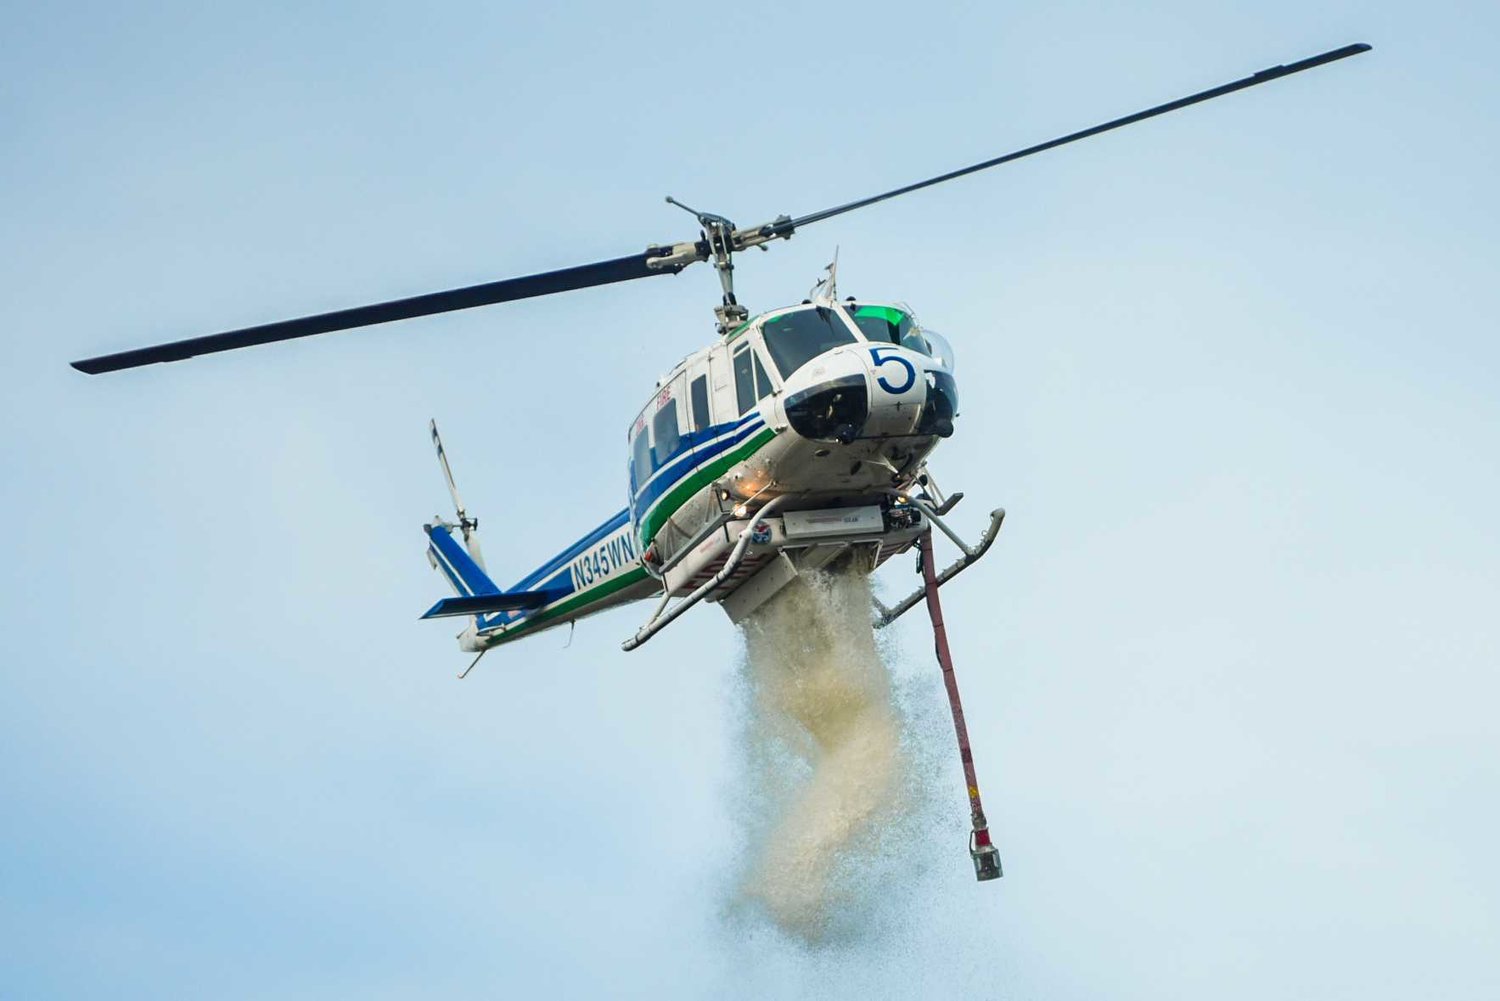 A DNR helicopter drops water on a brush fire in Doty last April.